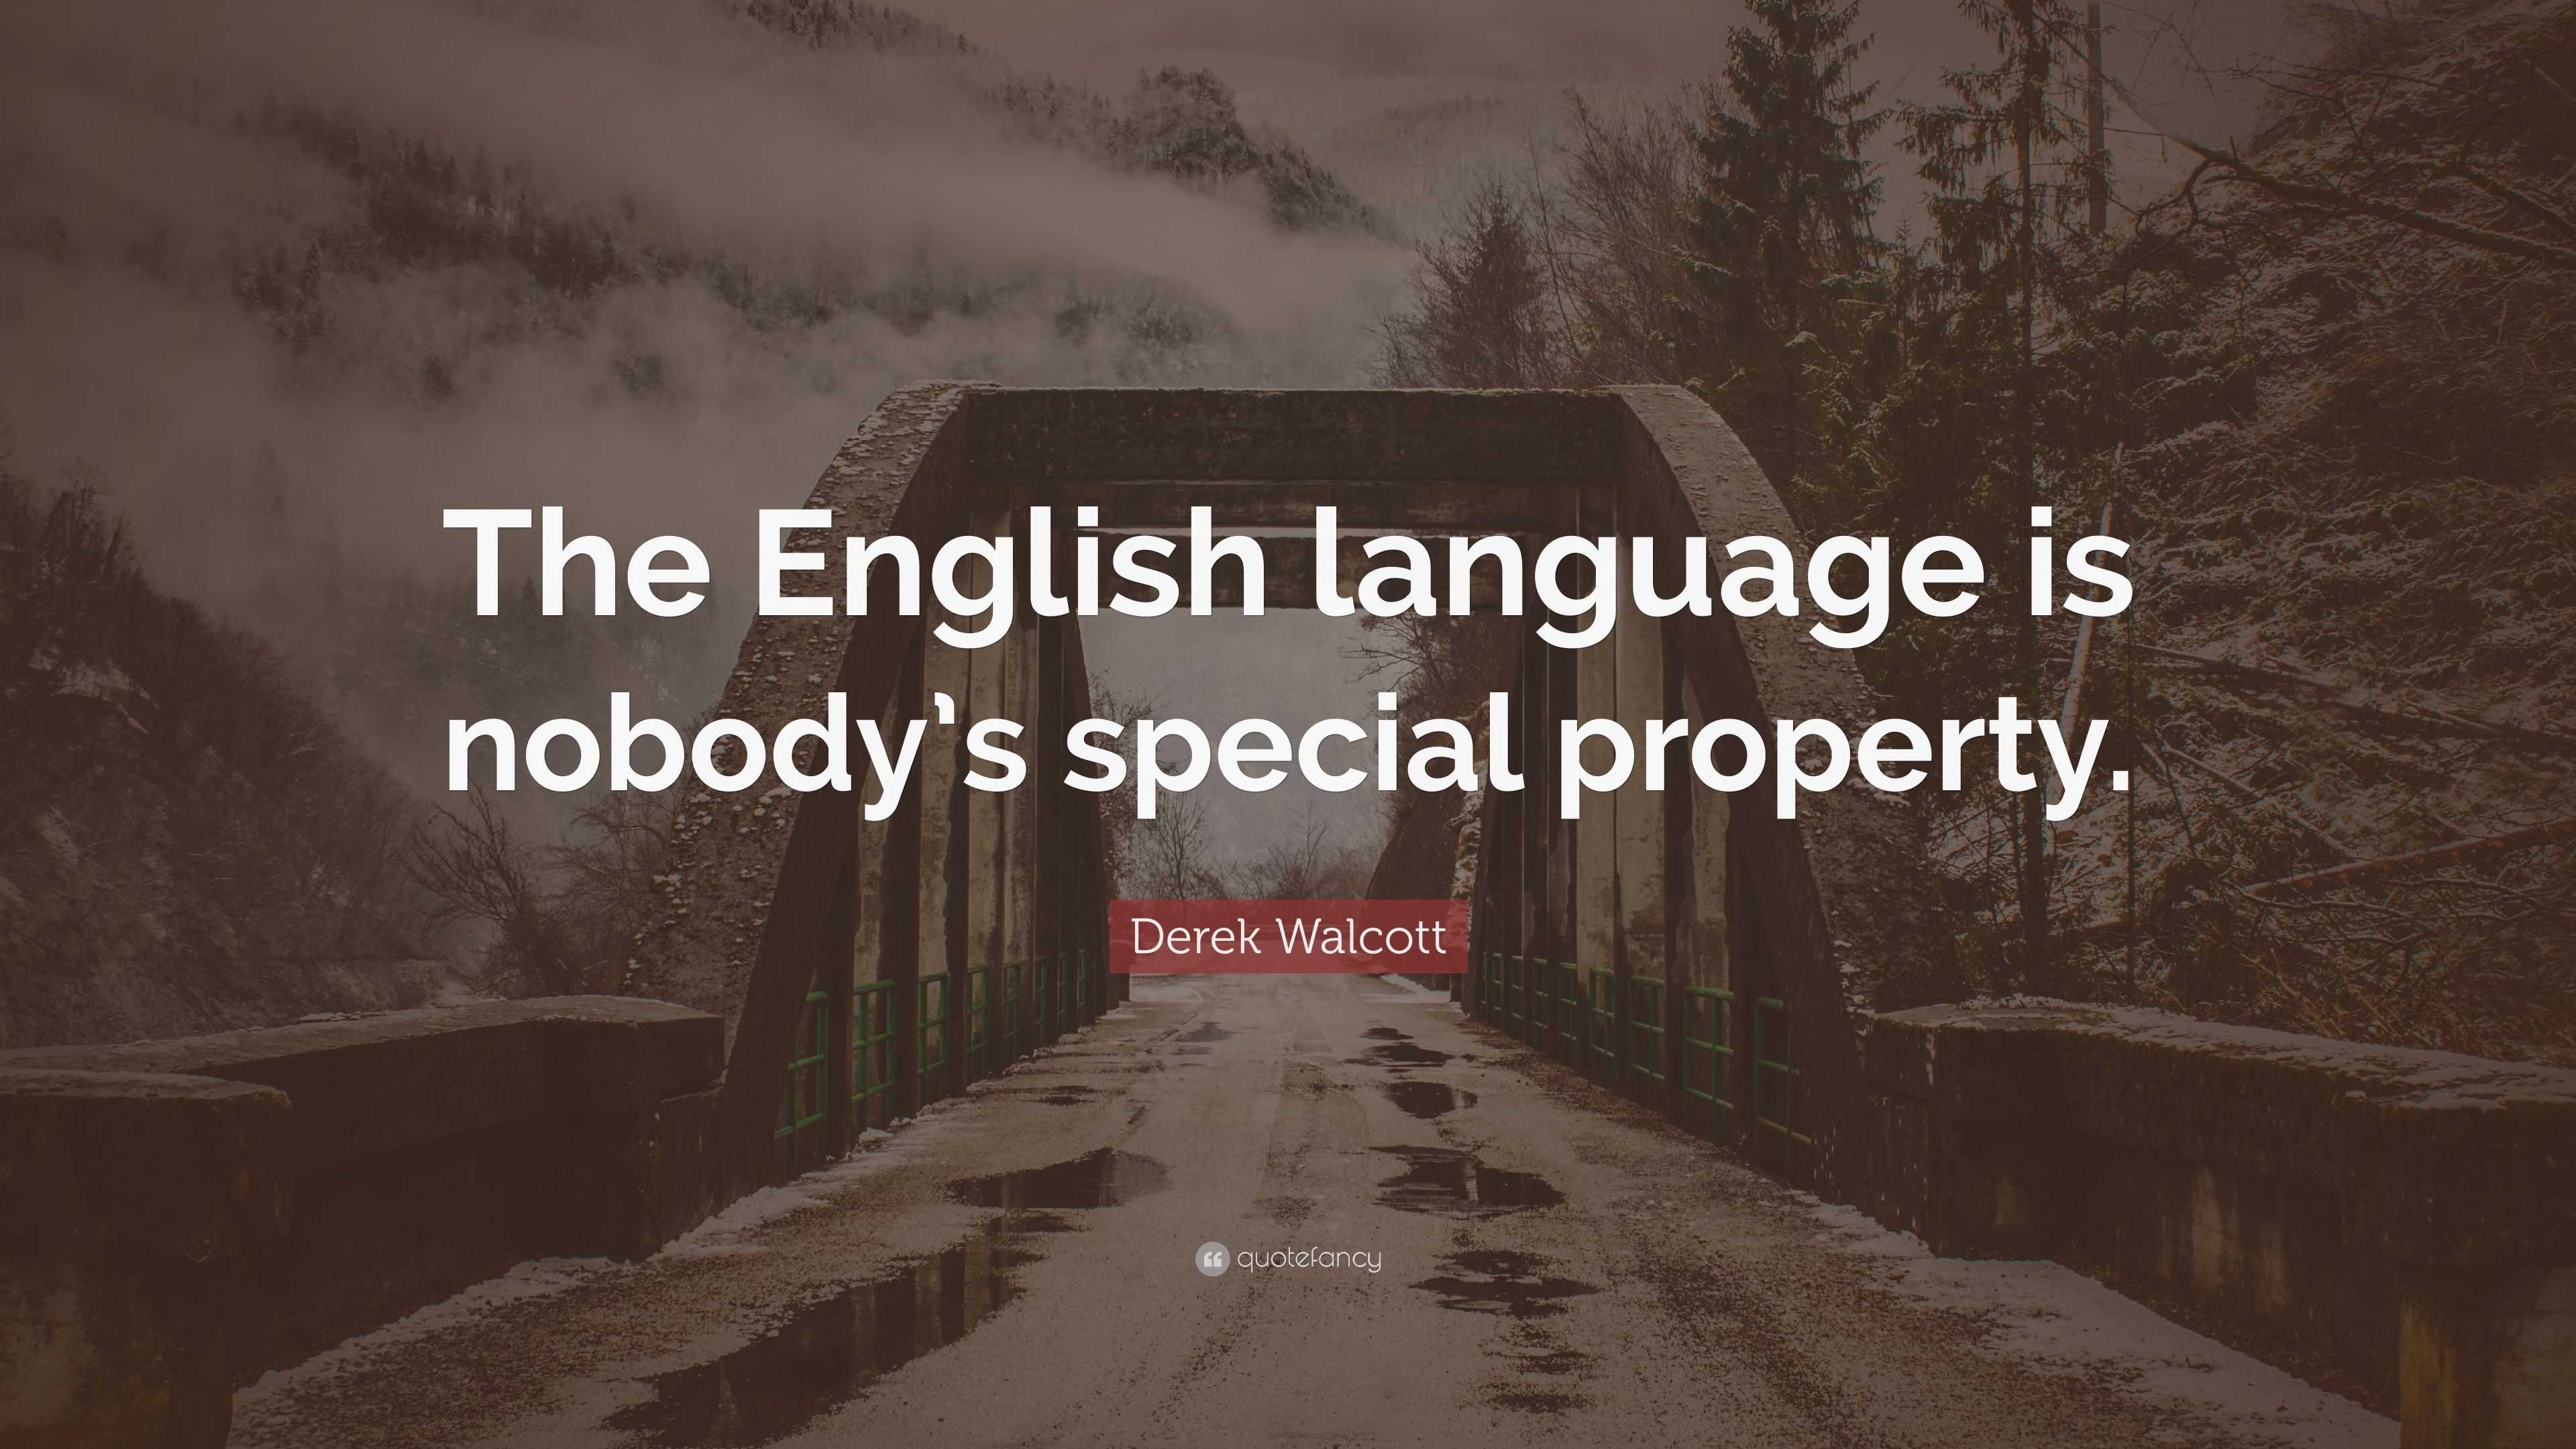 Derek Walcott Quote: “The English language is nobody’s special property.”